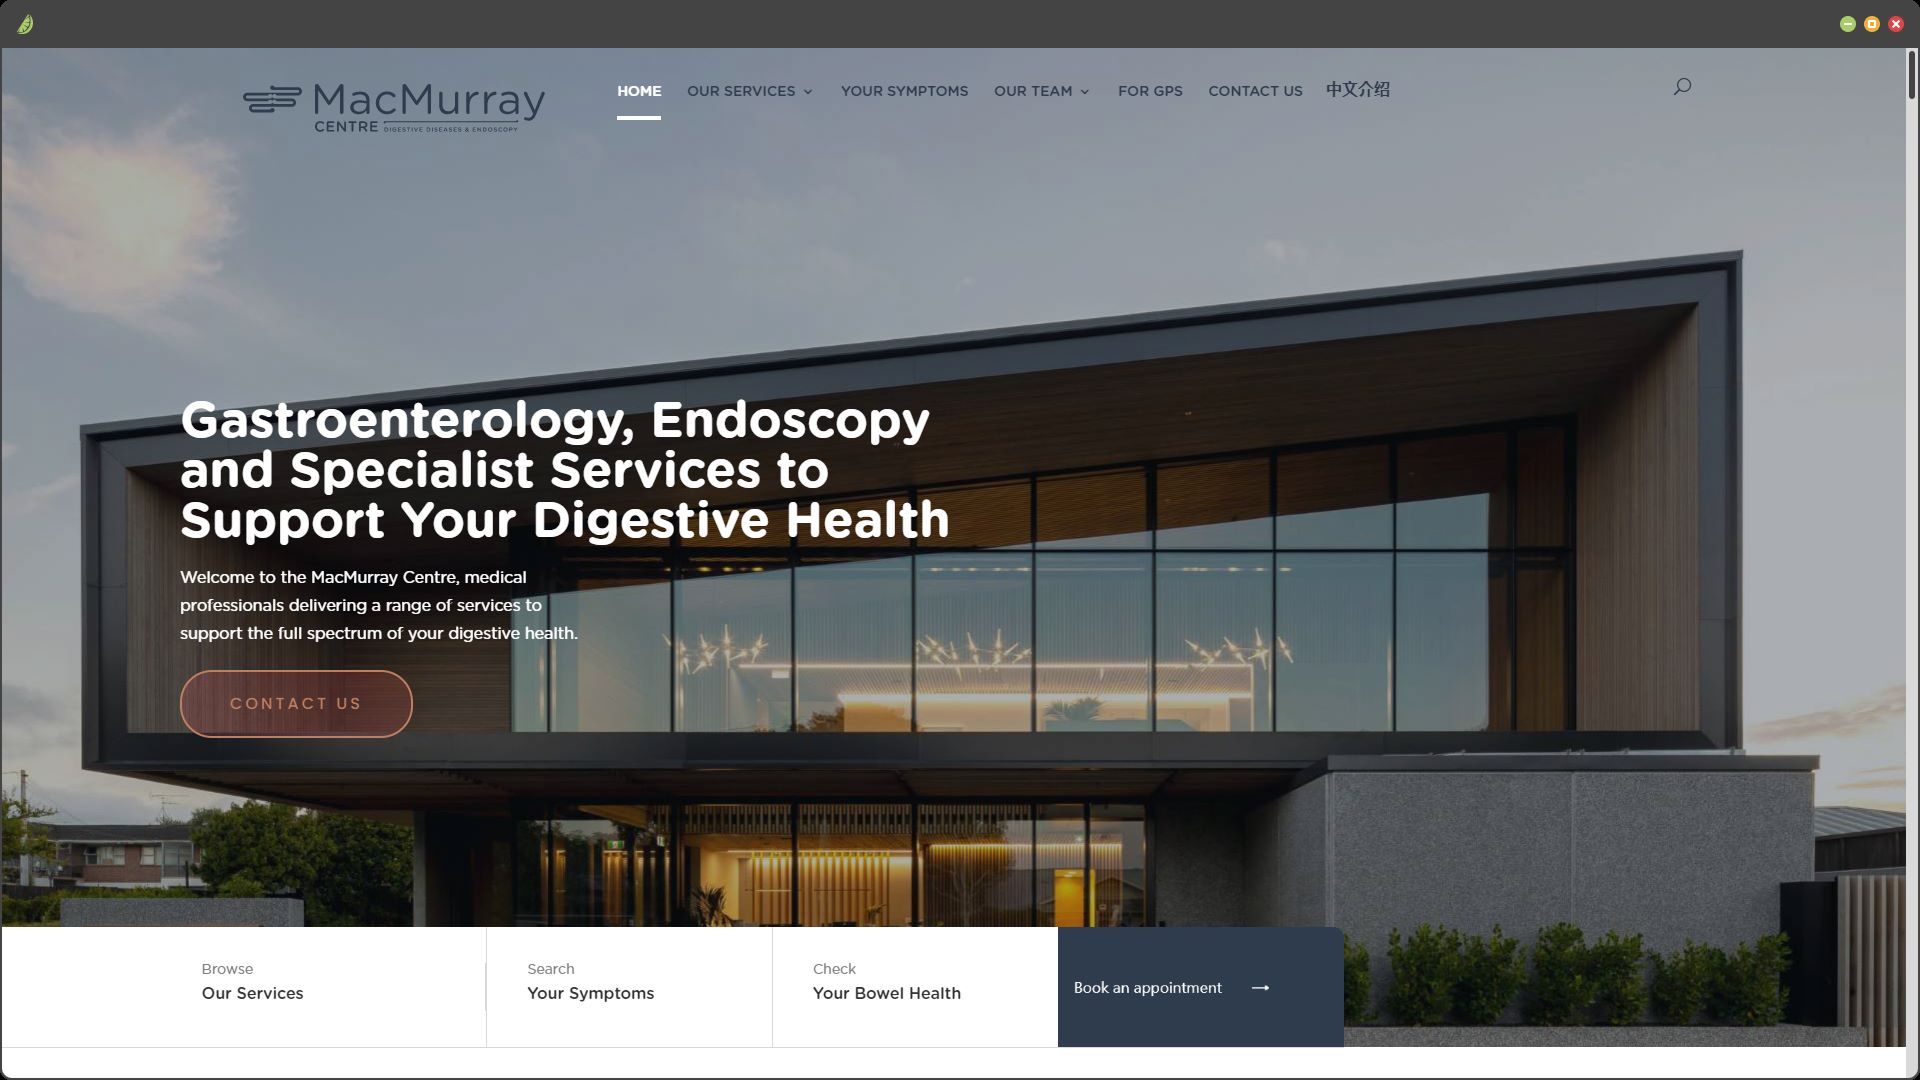 MacMurray homepage by laptop size